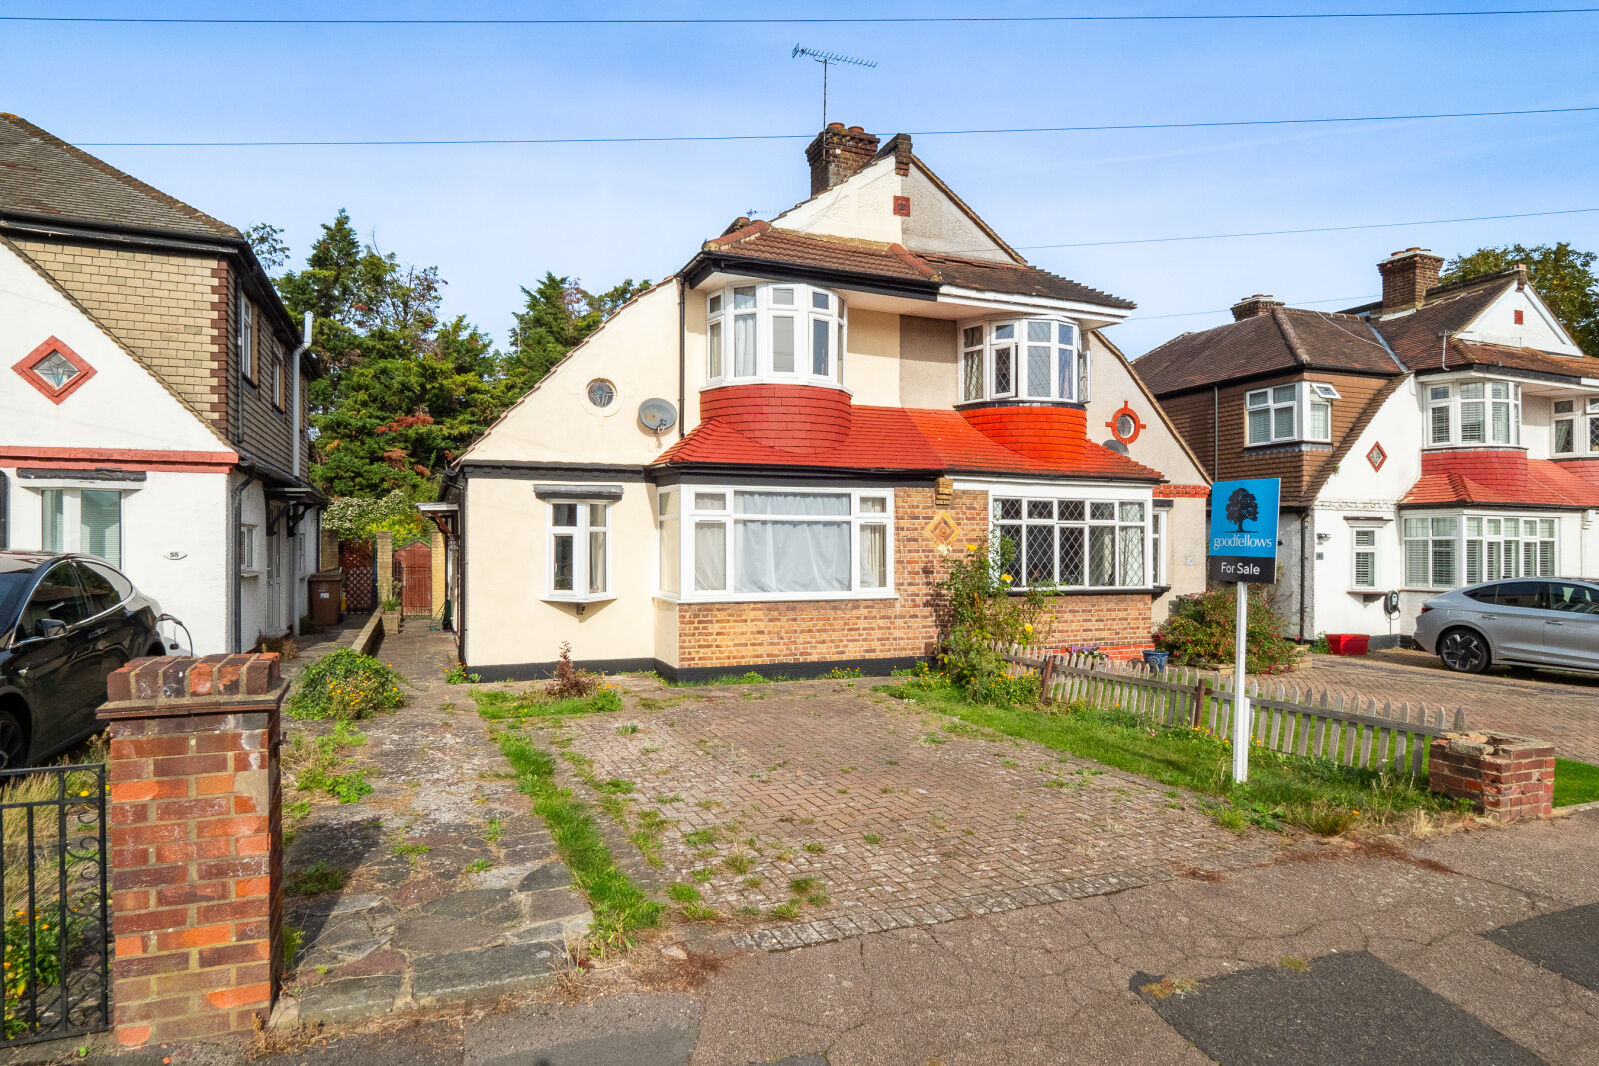 3 bedroom semi detached house for sale Priory Crescent, Cheam, SM3, main image